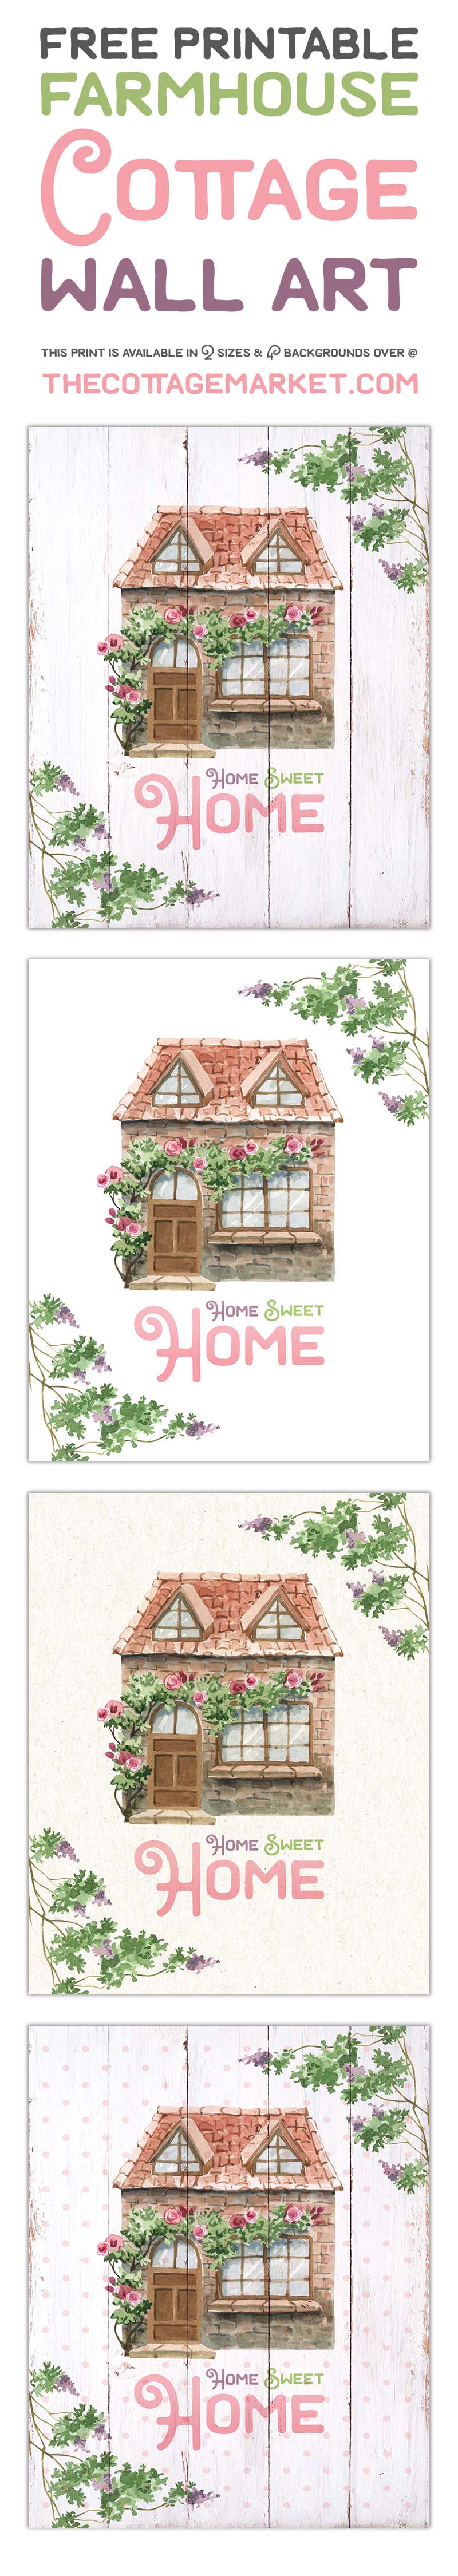 This Free Printable Farmhouse Cottage Wall Art Will Bring A Ton Of Charm To Your Home.